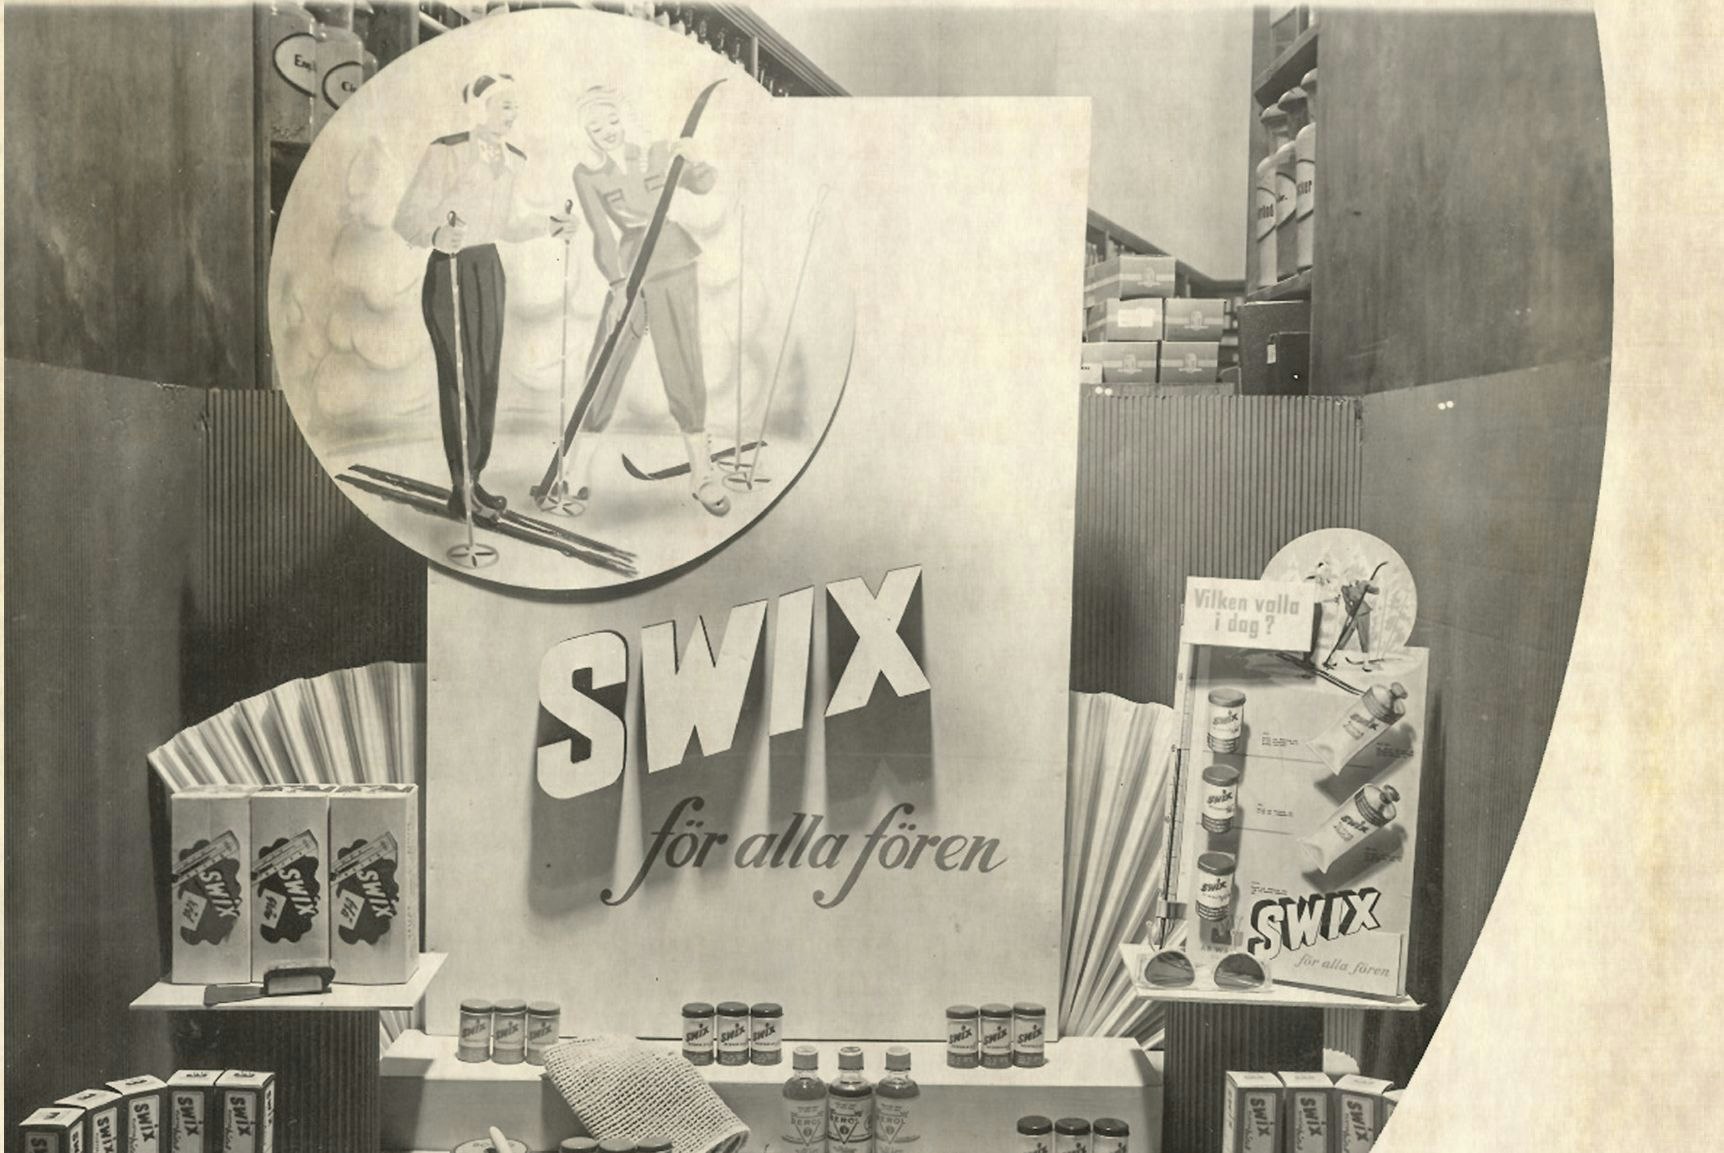 Old Swix products